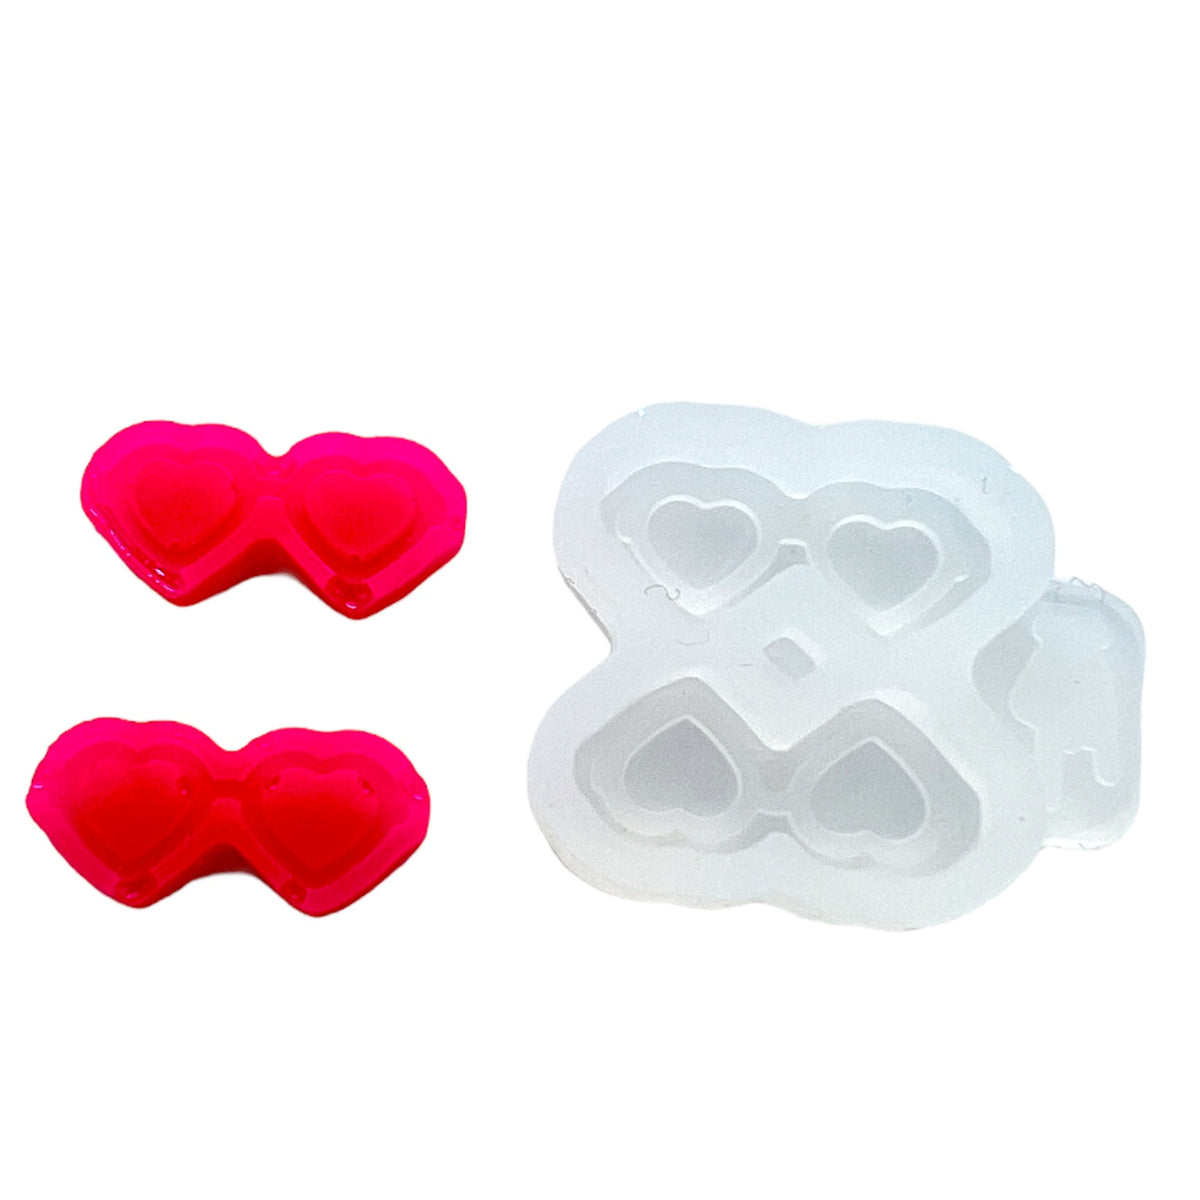 Tiny Heart Sunglasses Resin Rockers Exclusive Stud Earring Mold for UV and Epoxy Resin